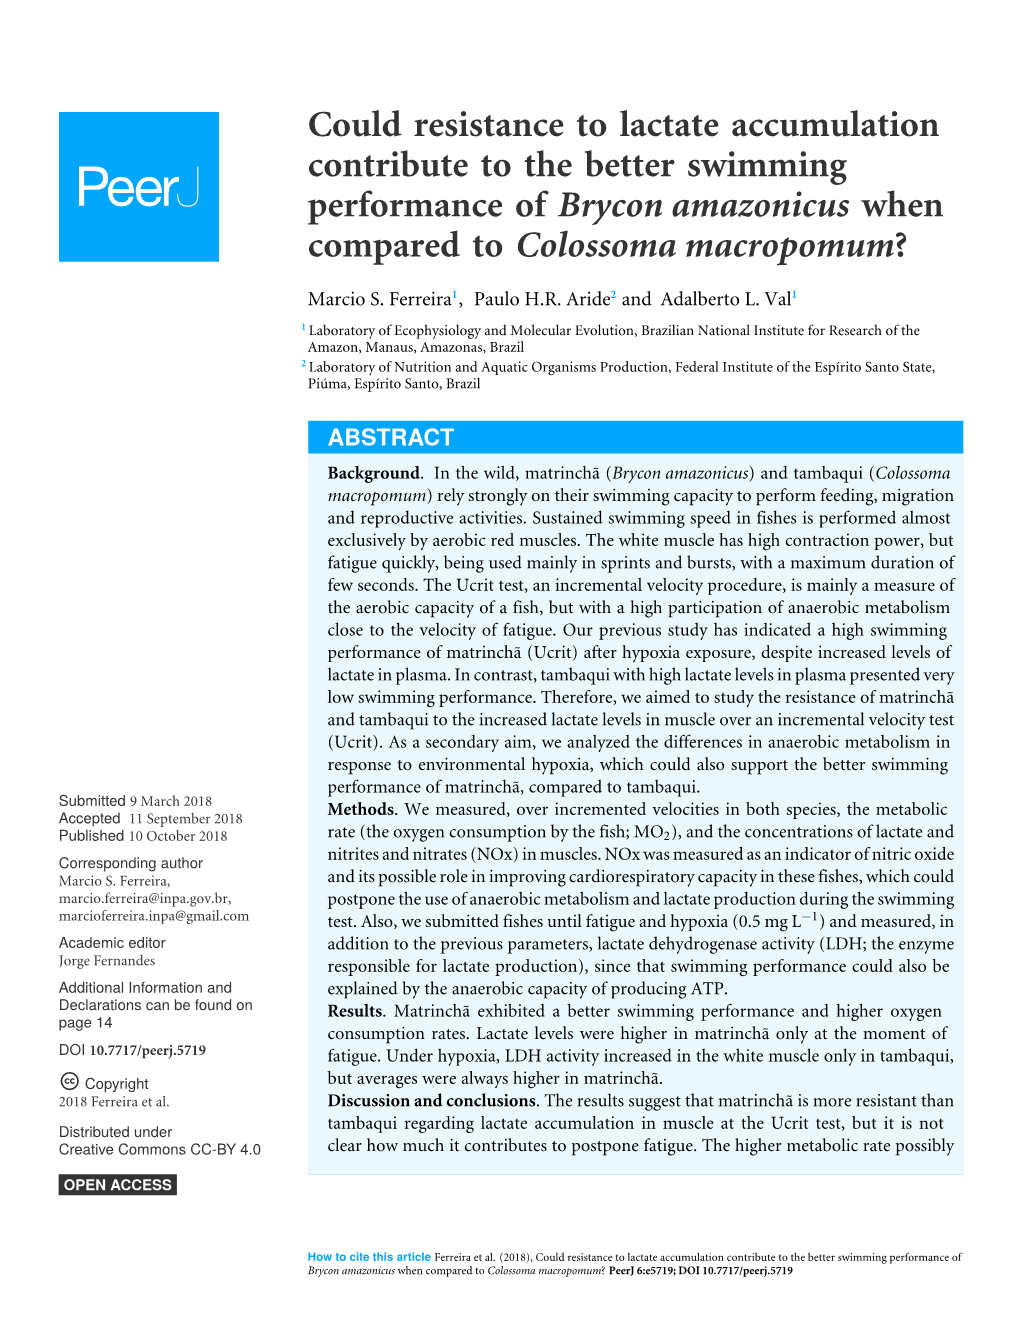 Could Resistance to Lactate Accumulation Contribute to the Better Swimming Performance of Brycon Amazonicus When Compared to Colossoma Macropomum?